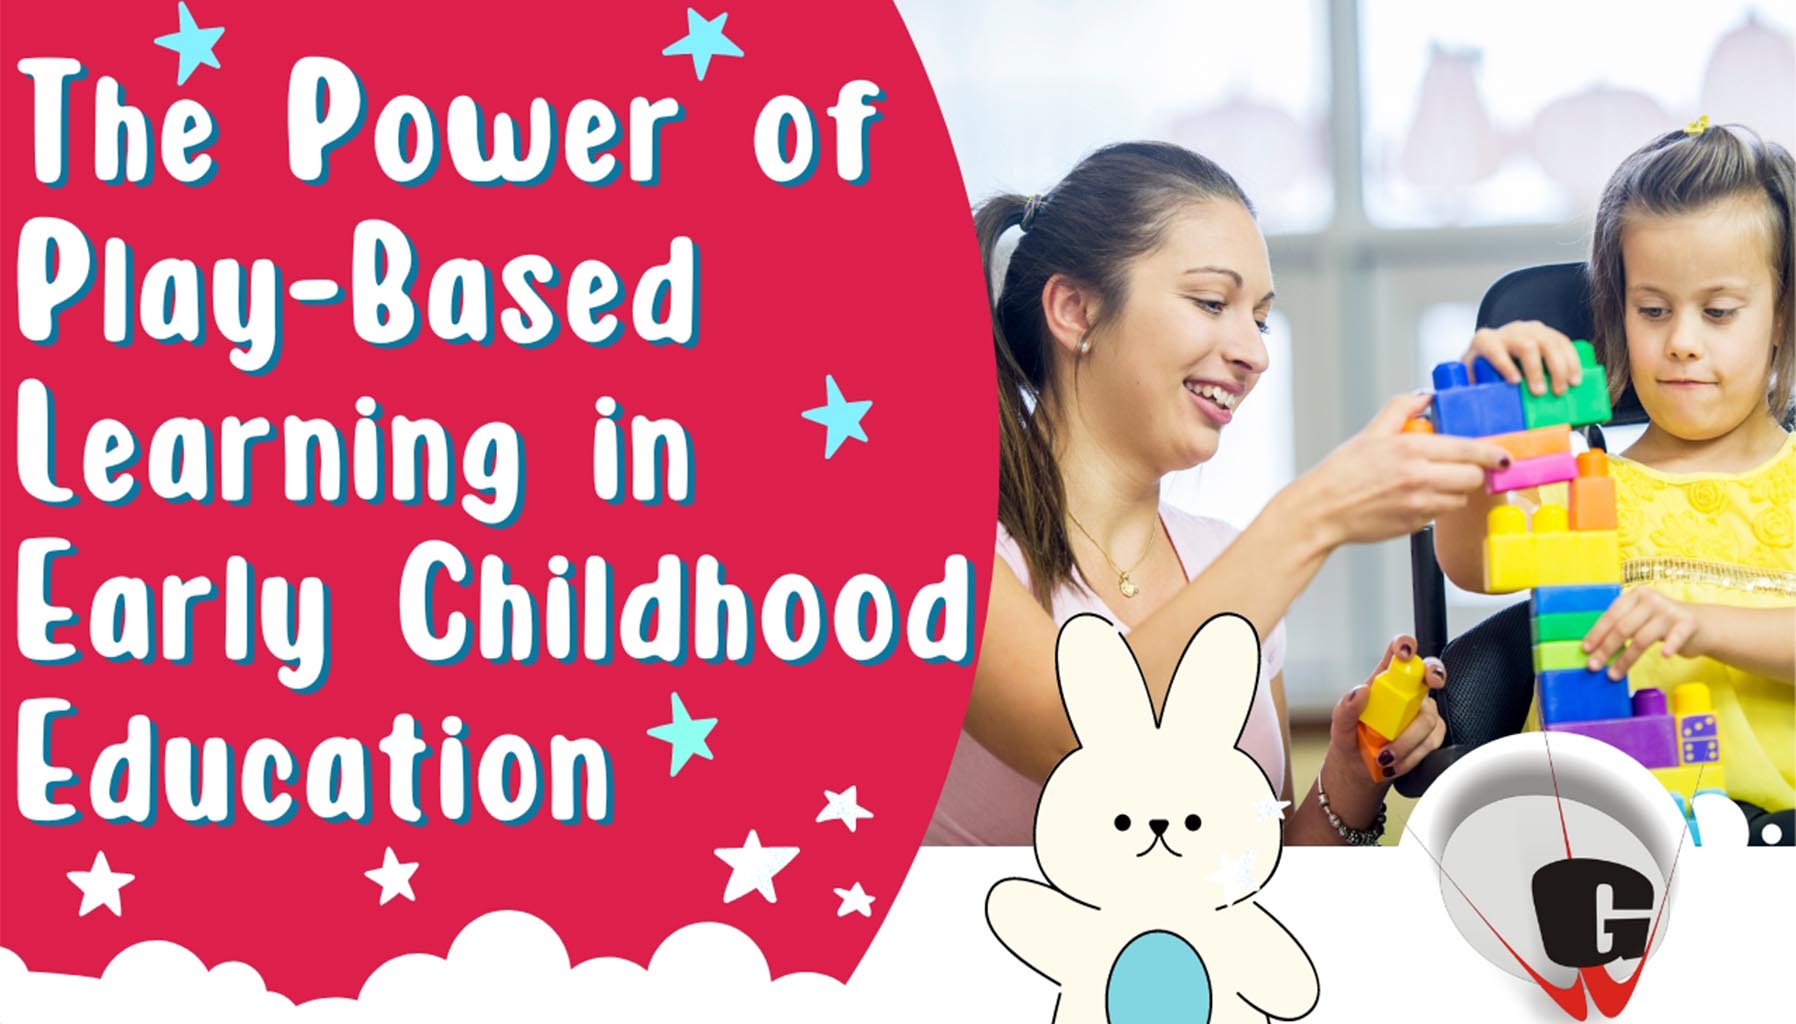 The Power of Play-Based Learning in Early Childhood Education